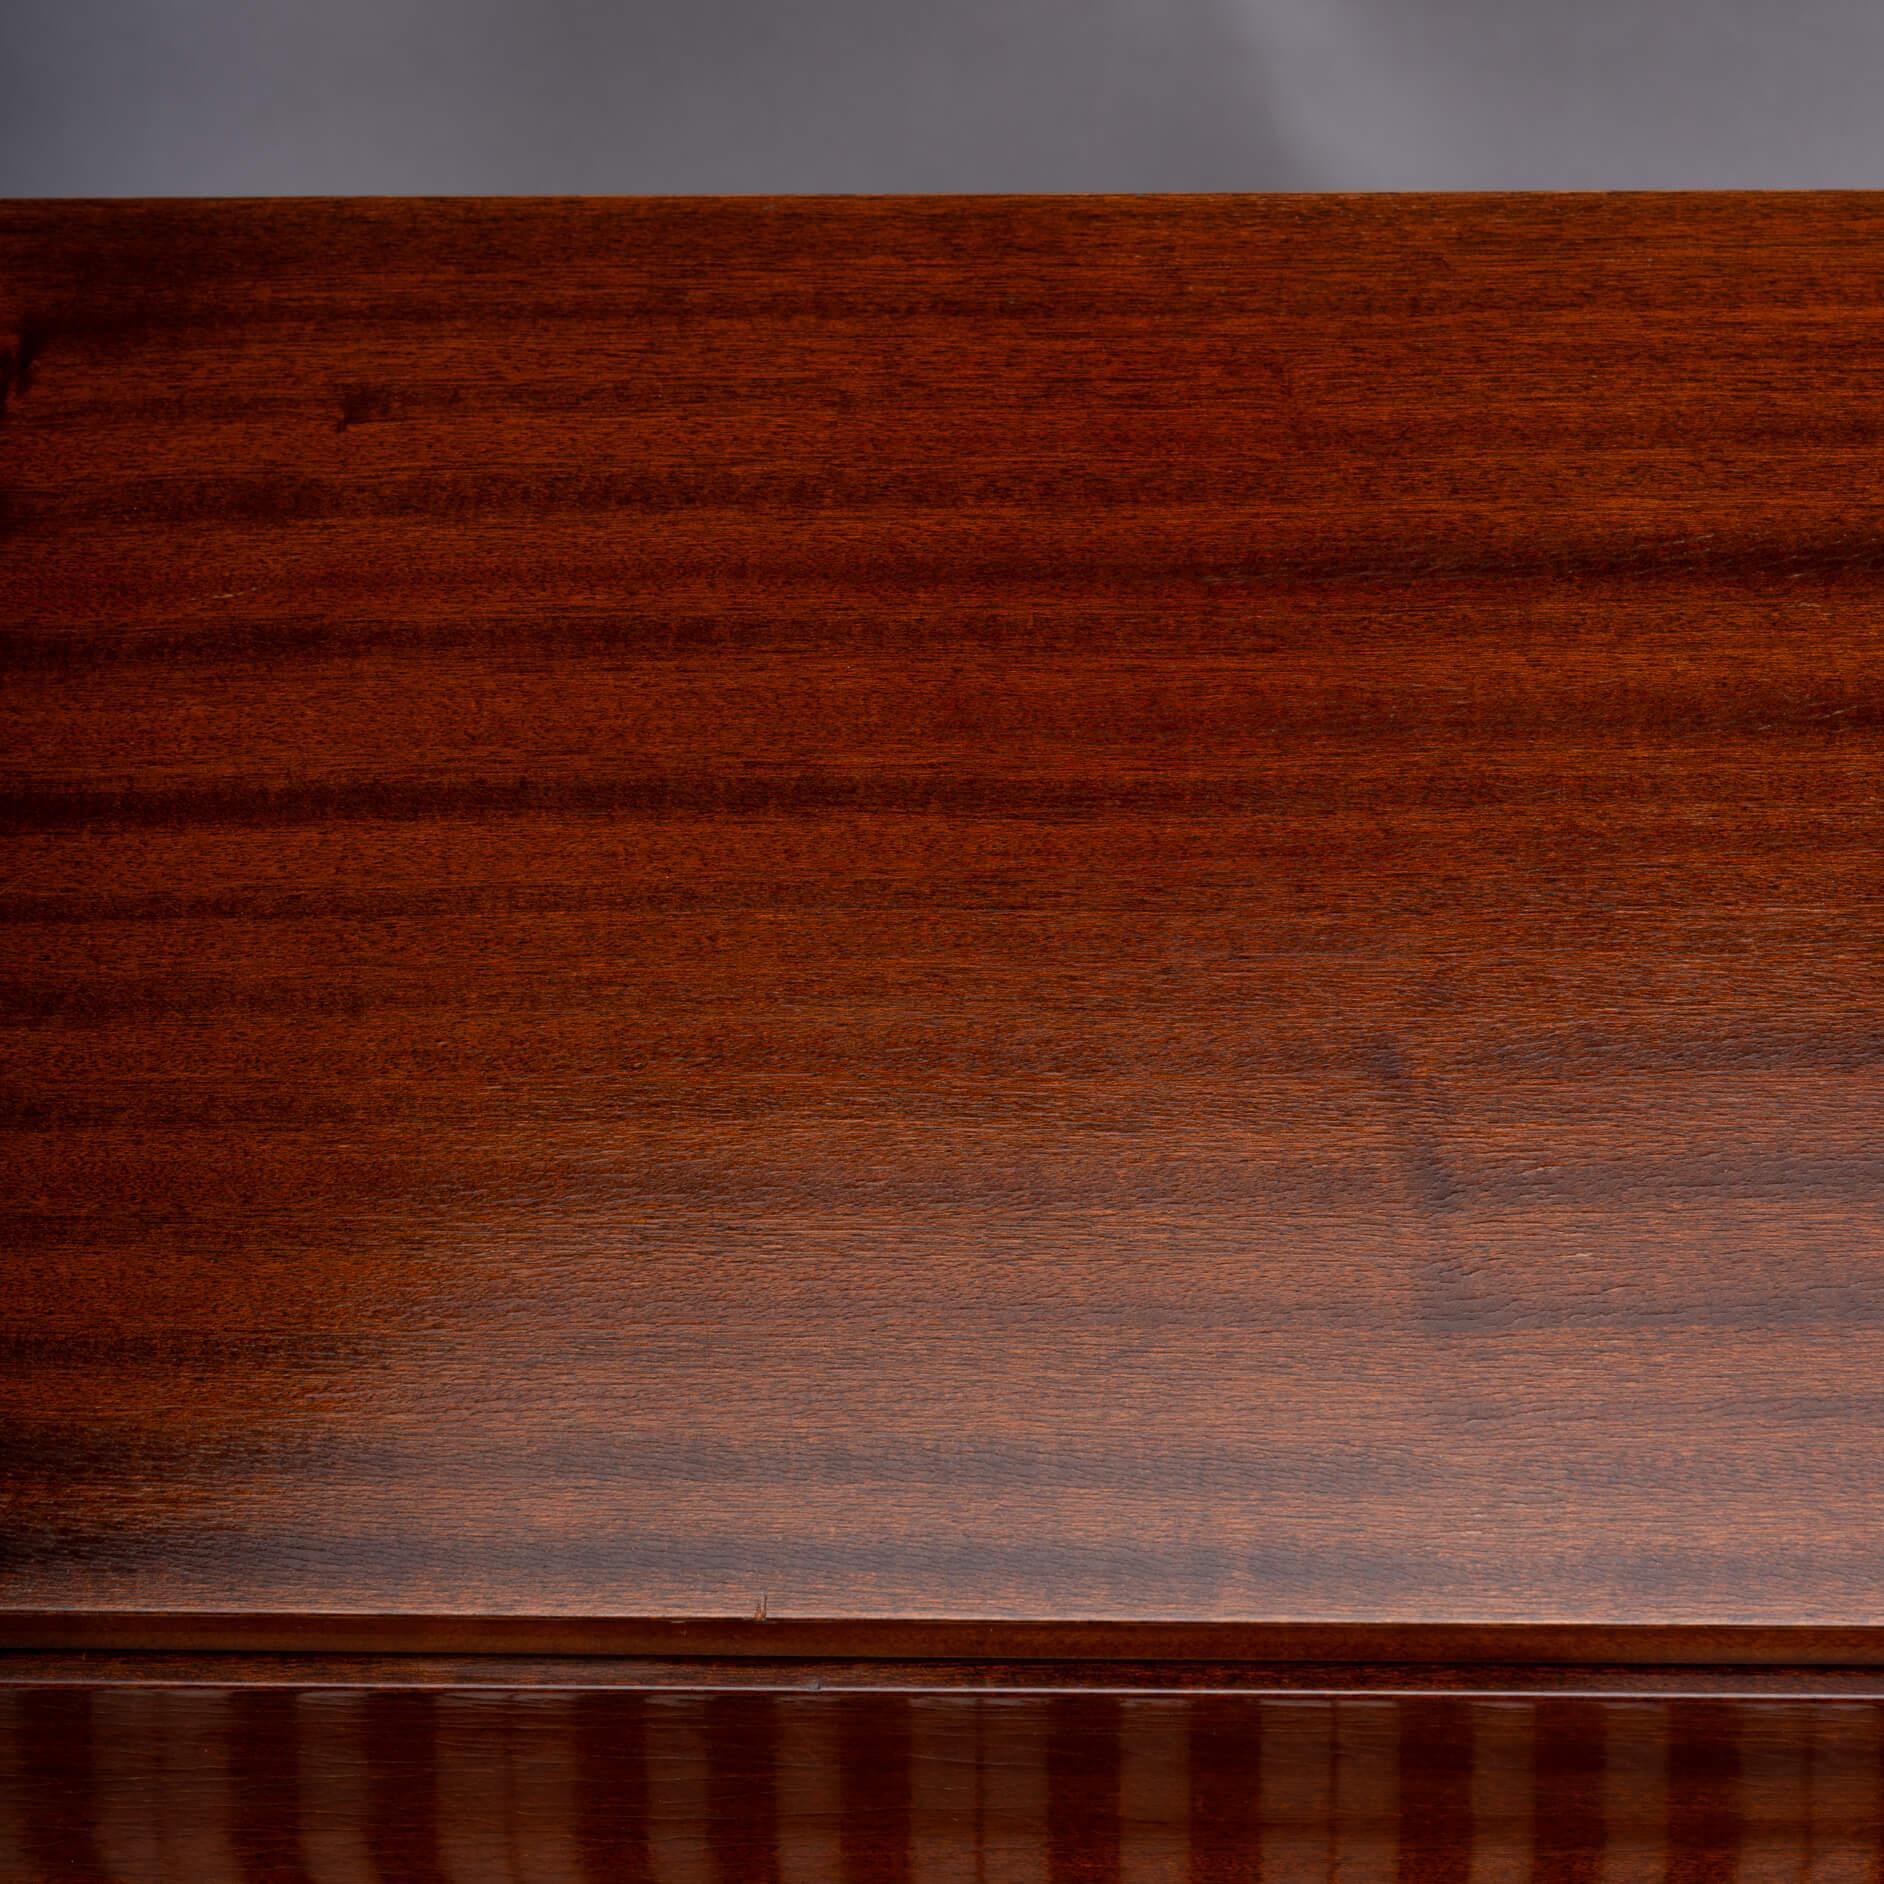 Danish Design Midcentury Pianette by Louis Zwicki in Mahogany, 1950s For Sale 3